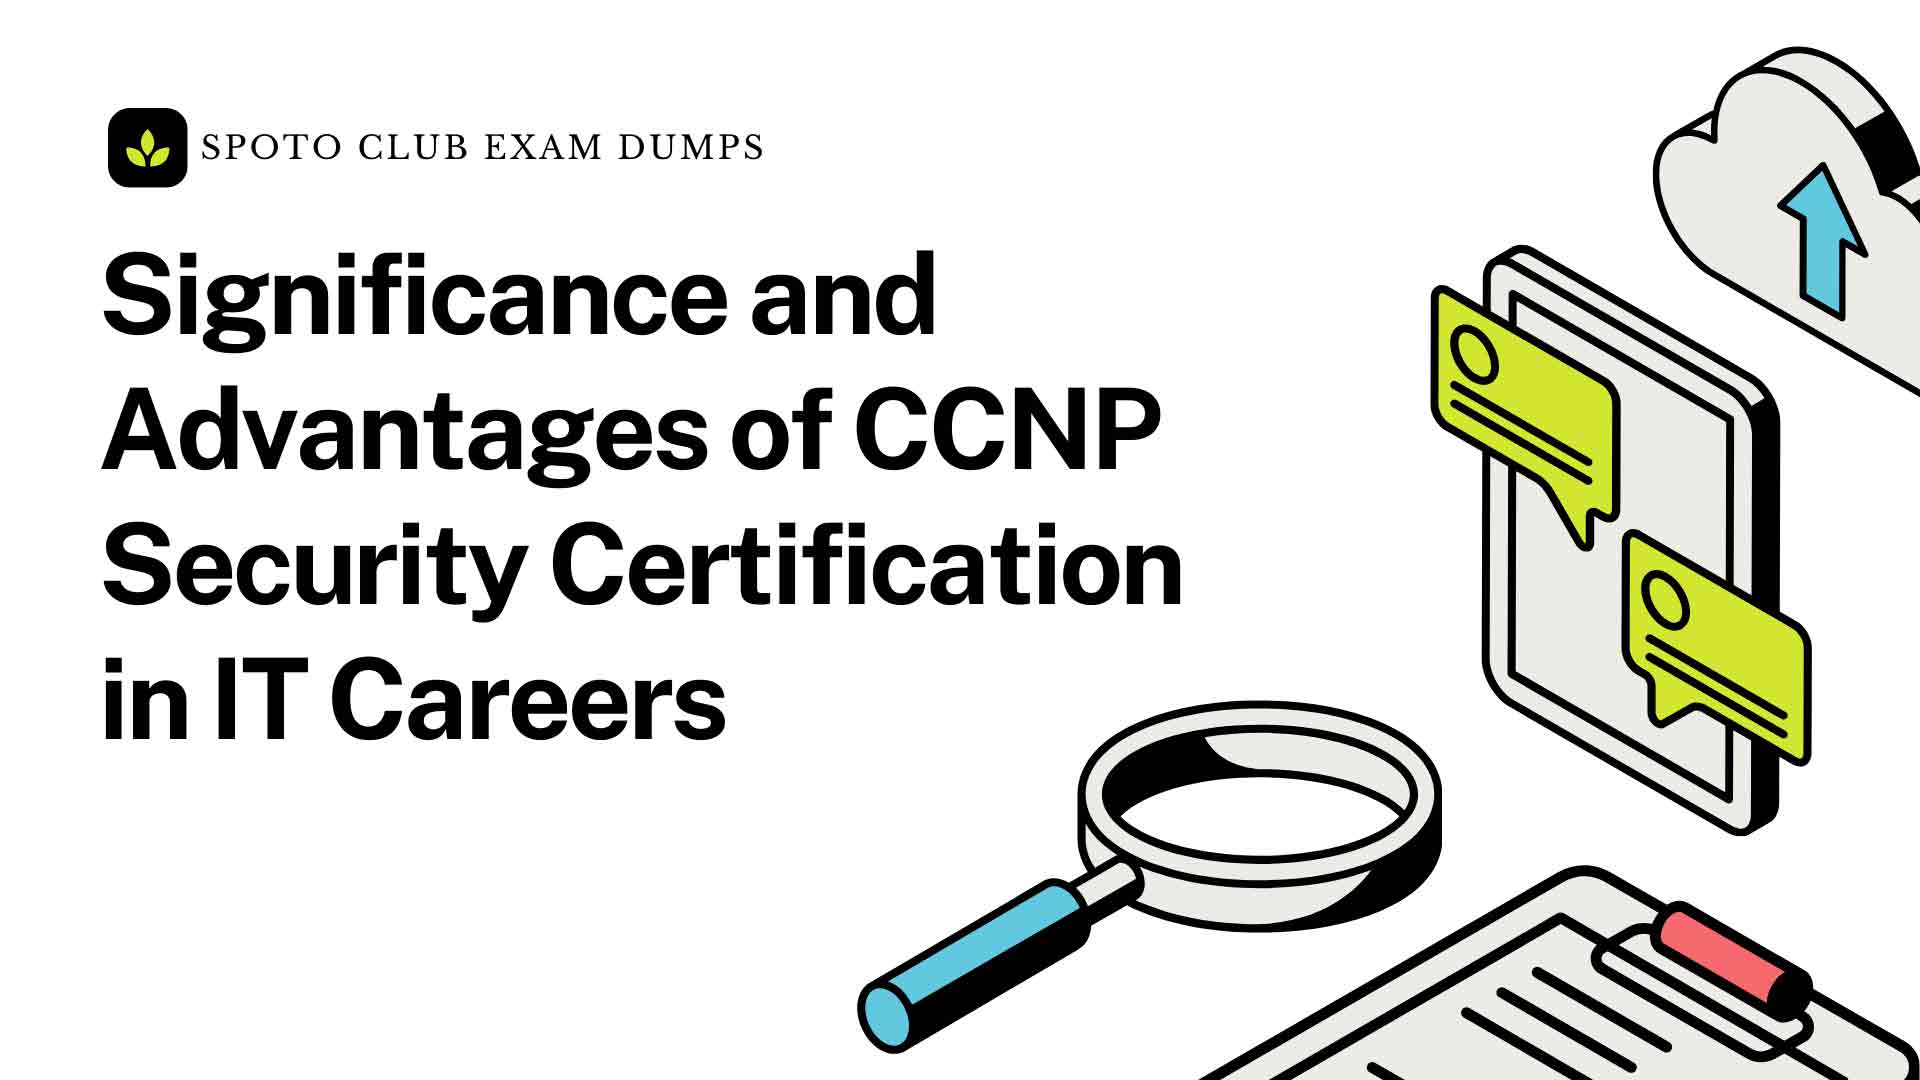 Significance and Advantages of CCNP Security Certification in IT Careers